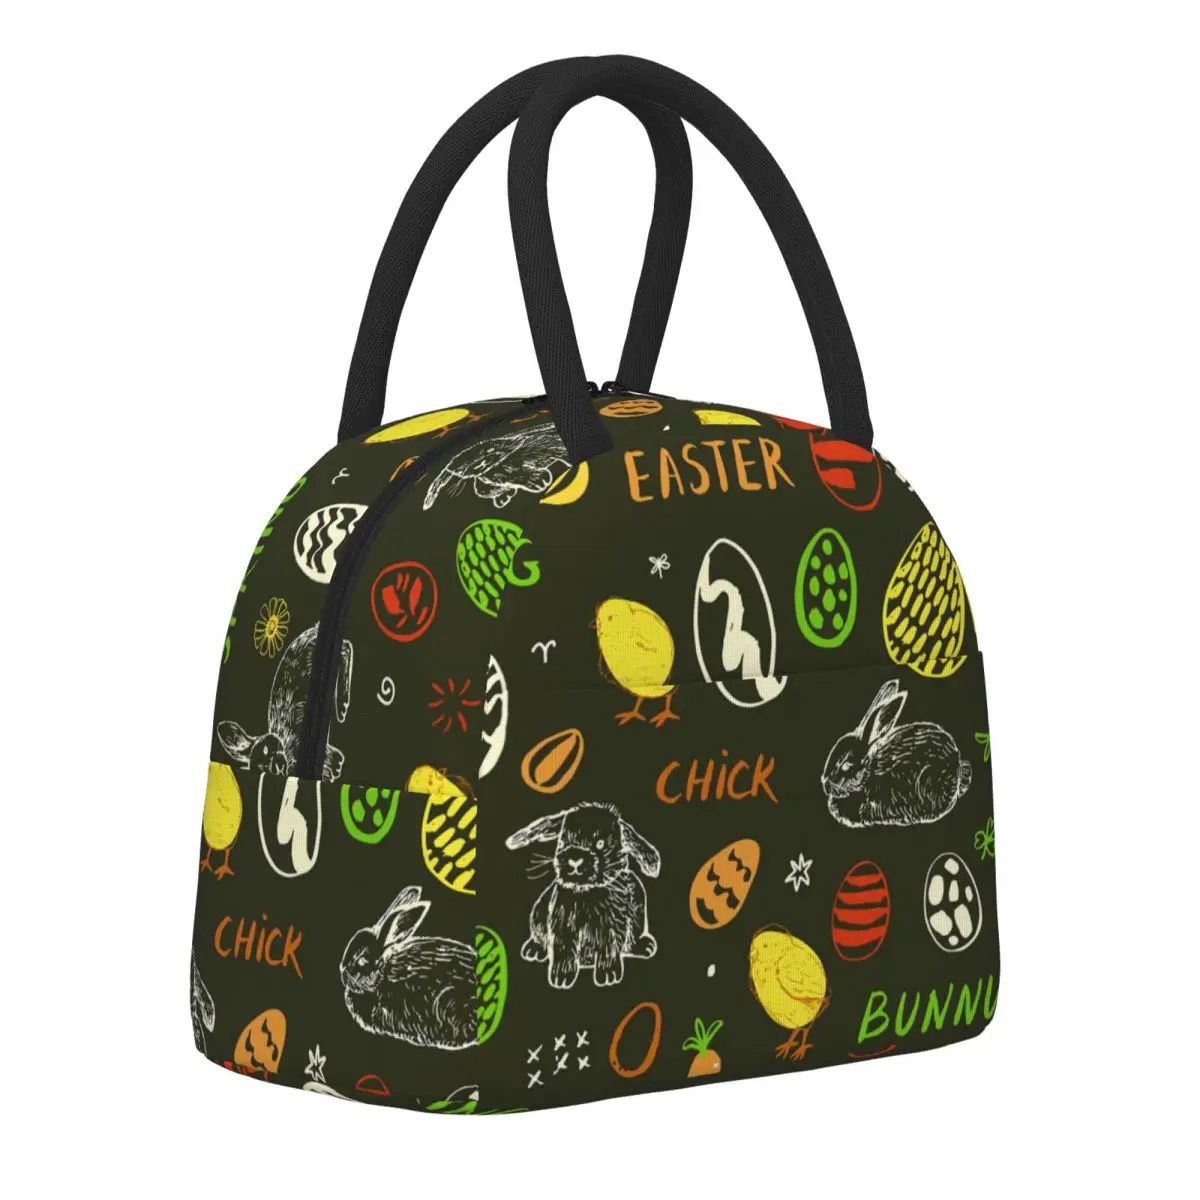 

Colorful Easter Lunch Bag Chick Bunny Eggs Print Lunch Box Leisure Travel Cooler Bag Portable Insulated Oxford Tote Food Bags